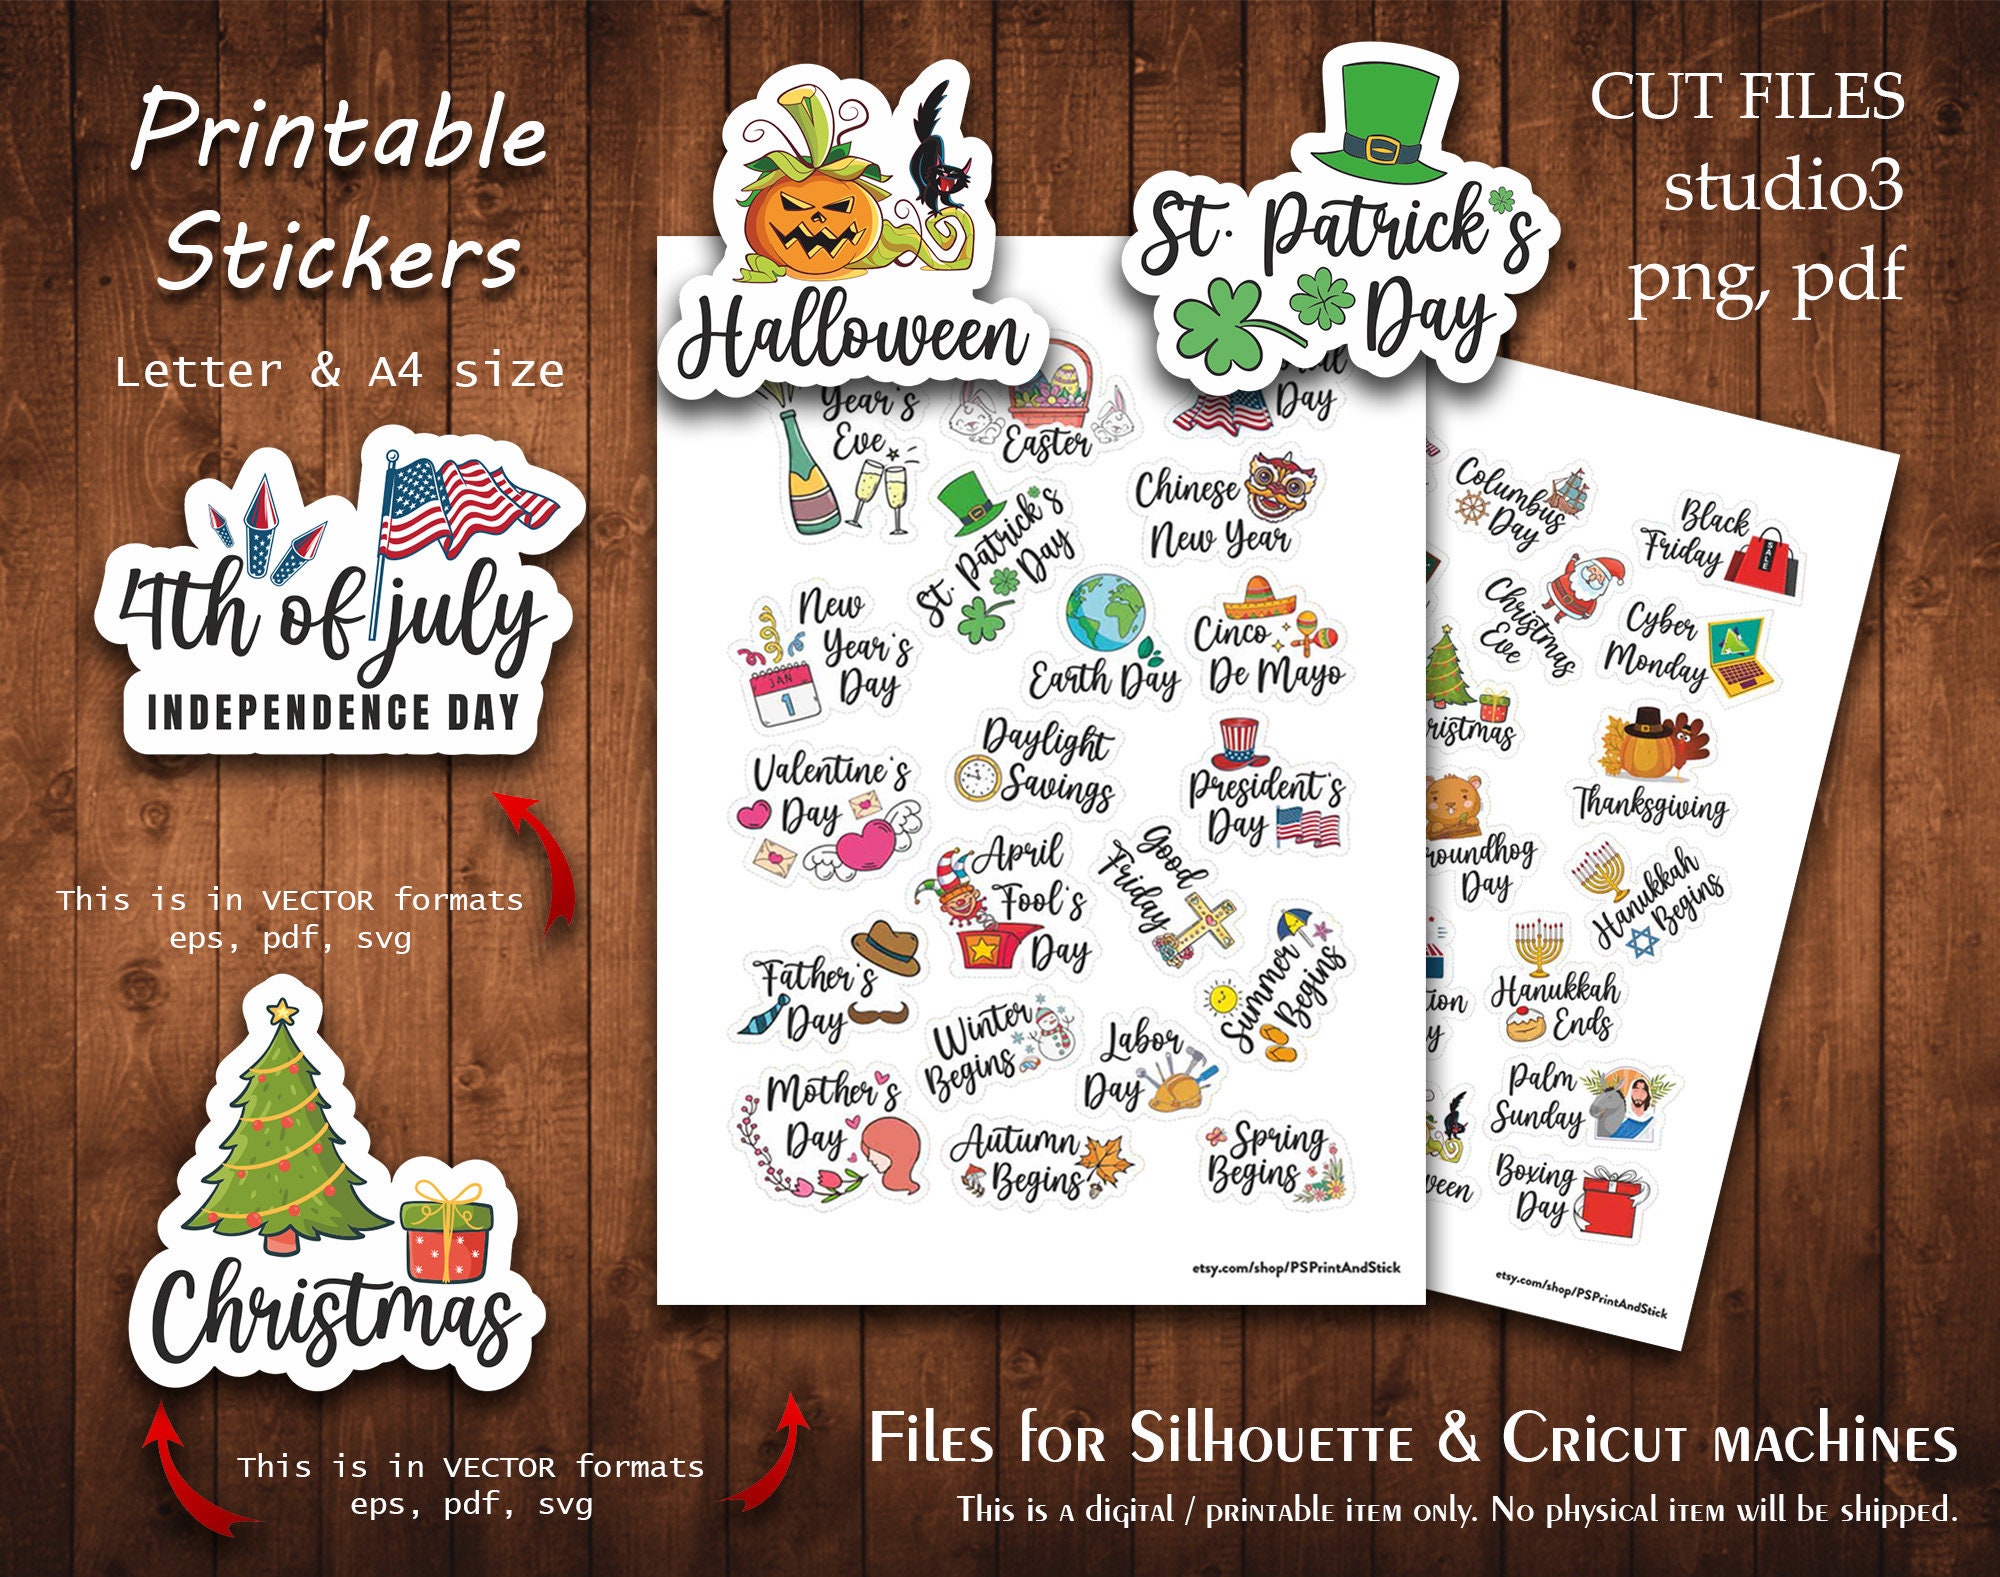 Year-Round Holiday Stickers Variety Pack: Fun Assortment of Designs for a  Whole Year (400+ Stickers)